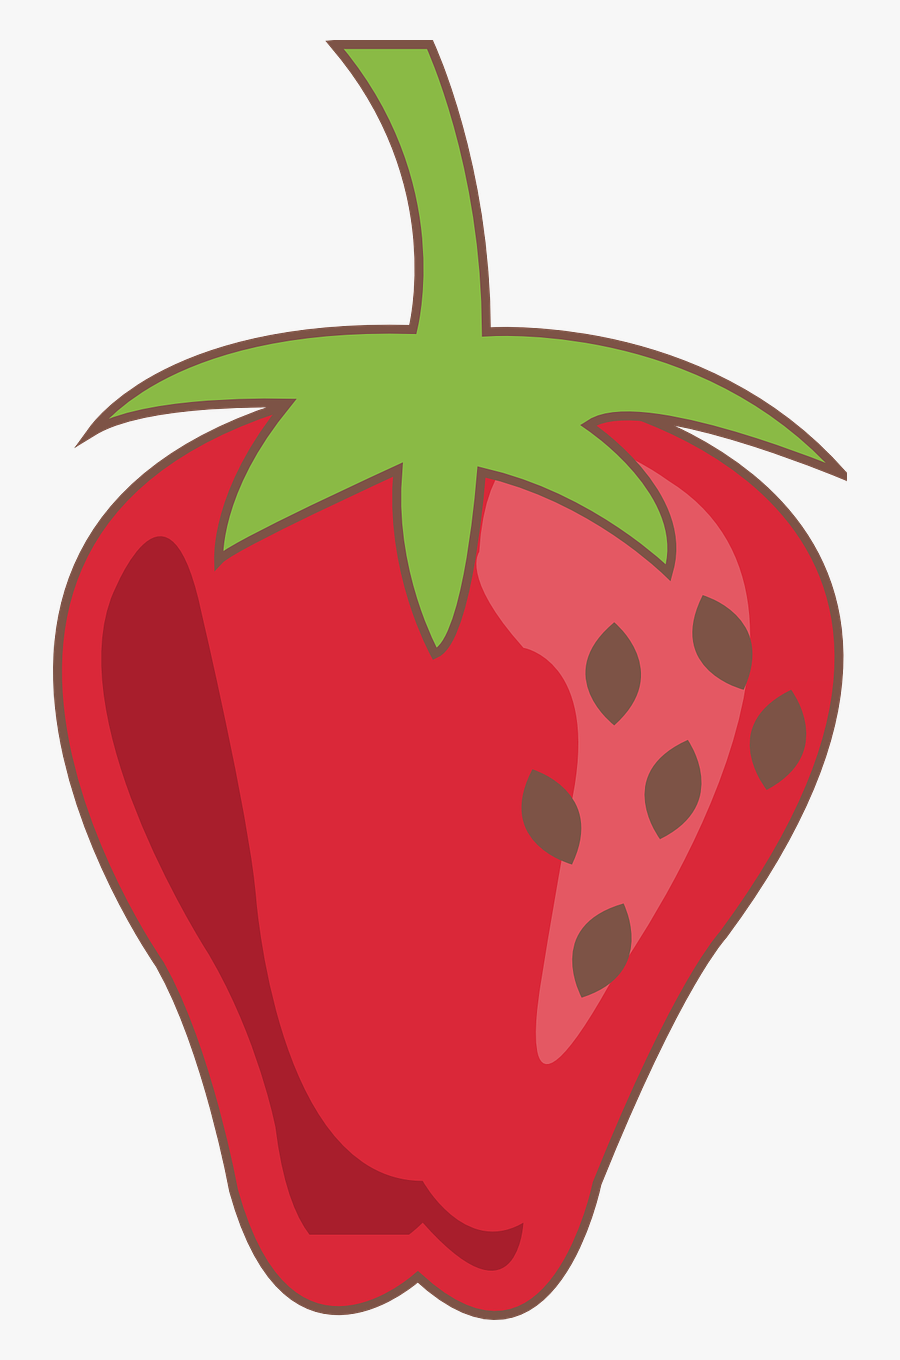 Strawberry Fruit Catering Free Picture - ภาพ วาด สต อ เบ อ รี่, Transparent Clipart